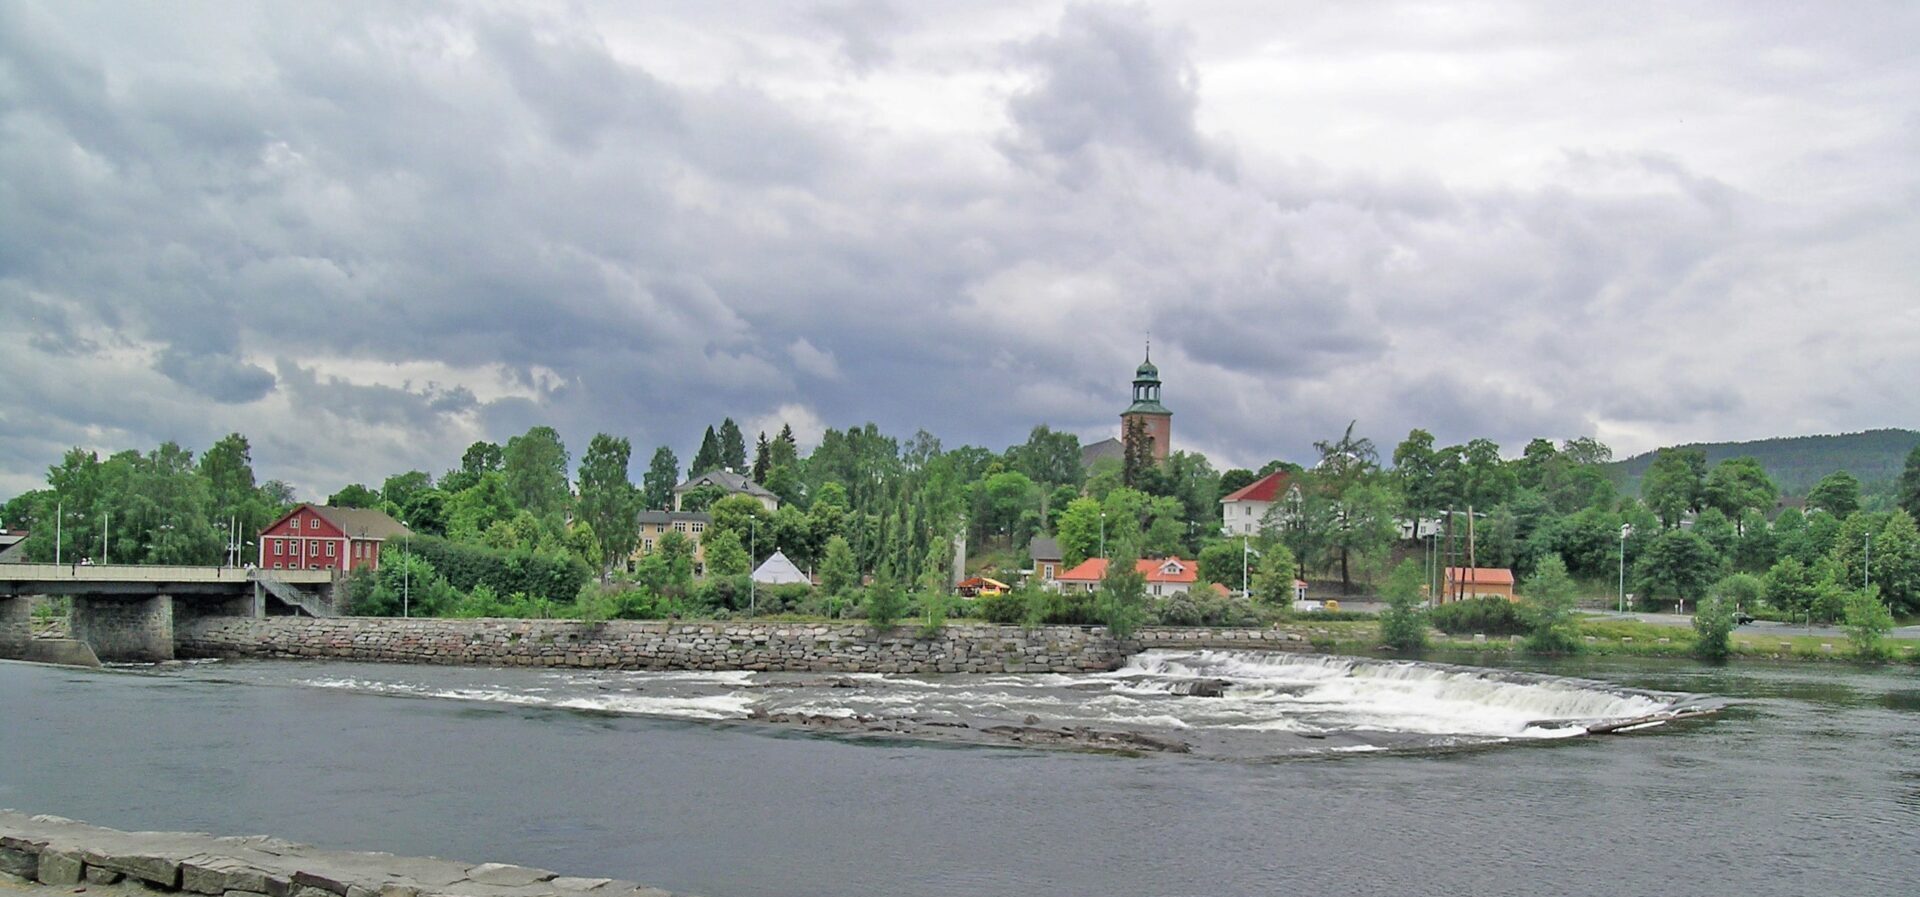 Featured image for “Kongsberg”